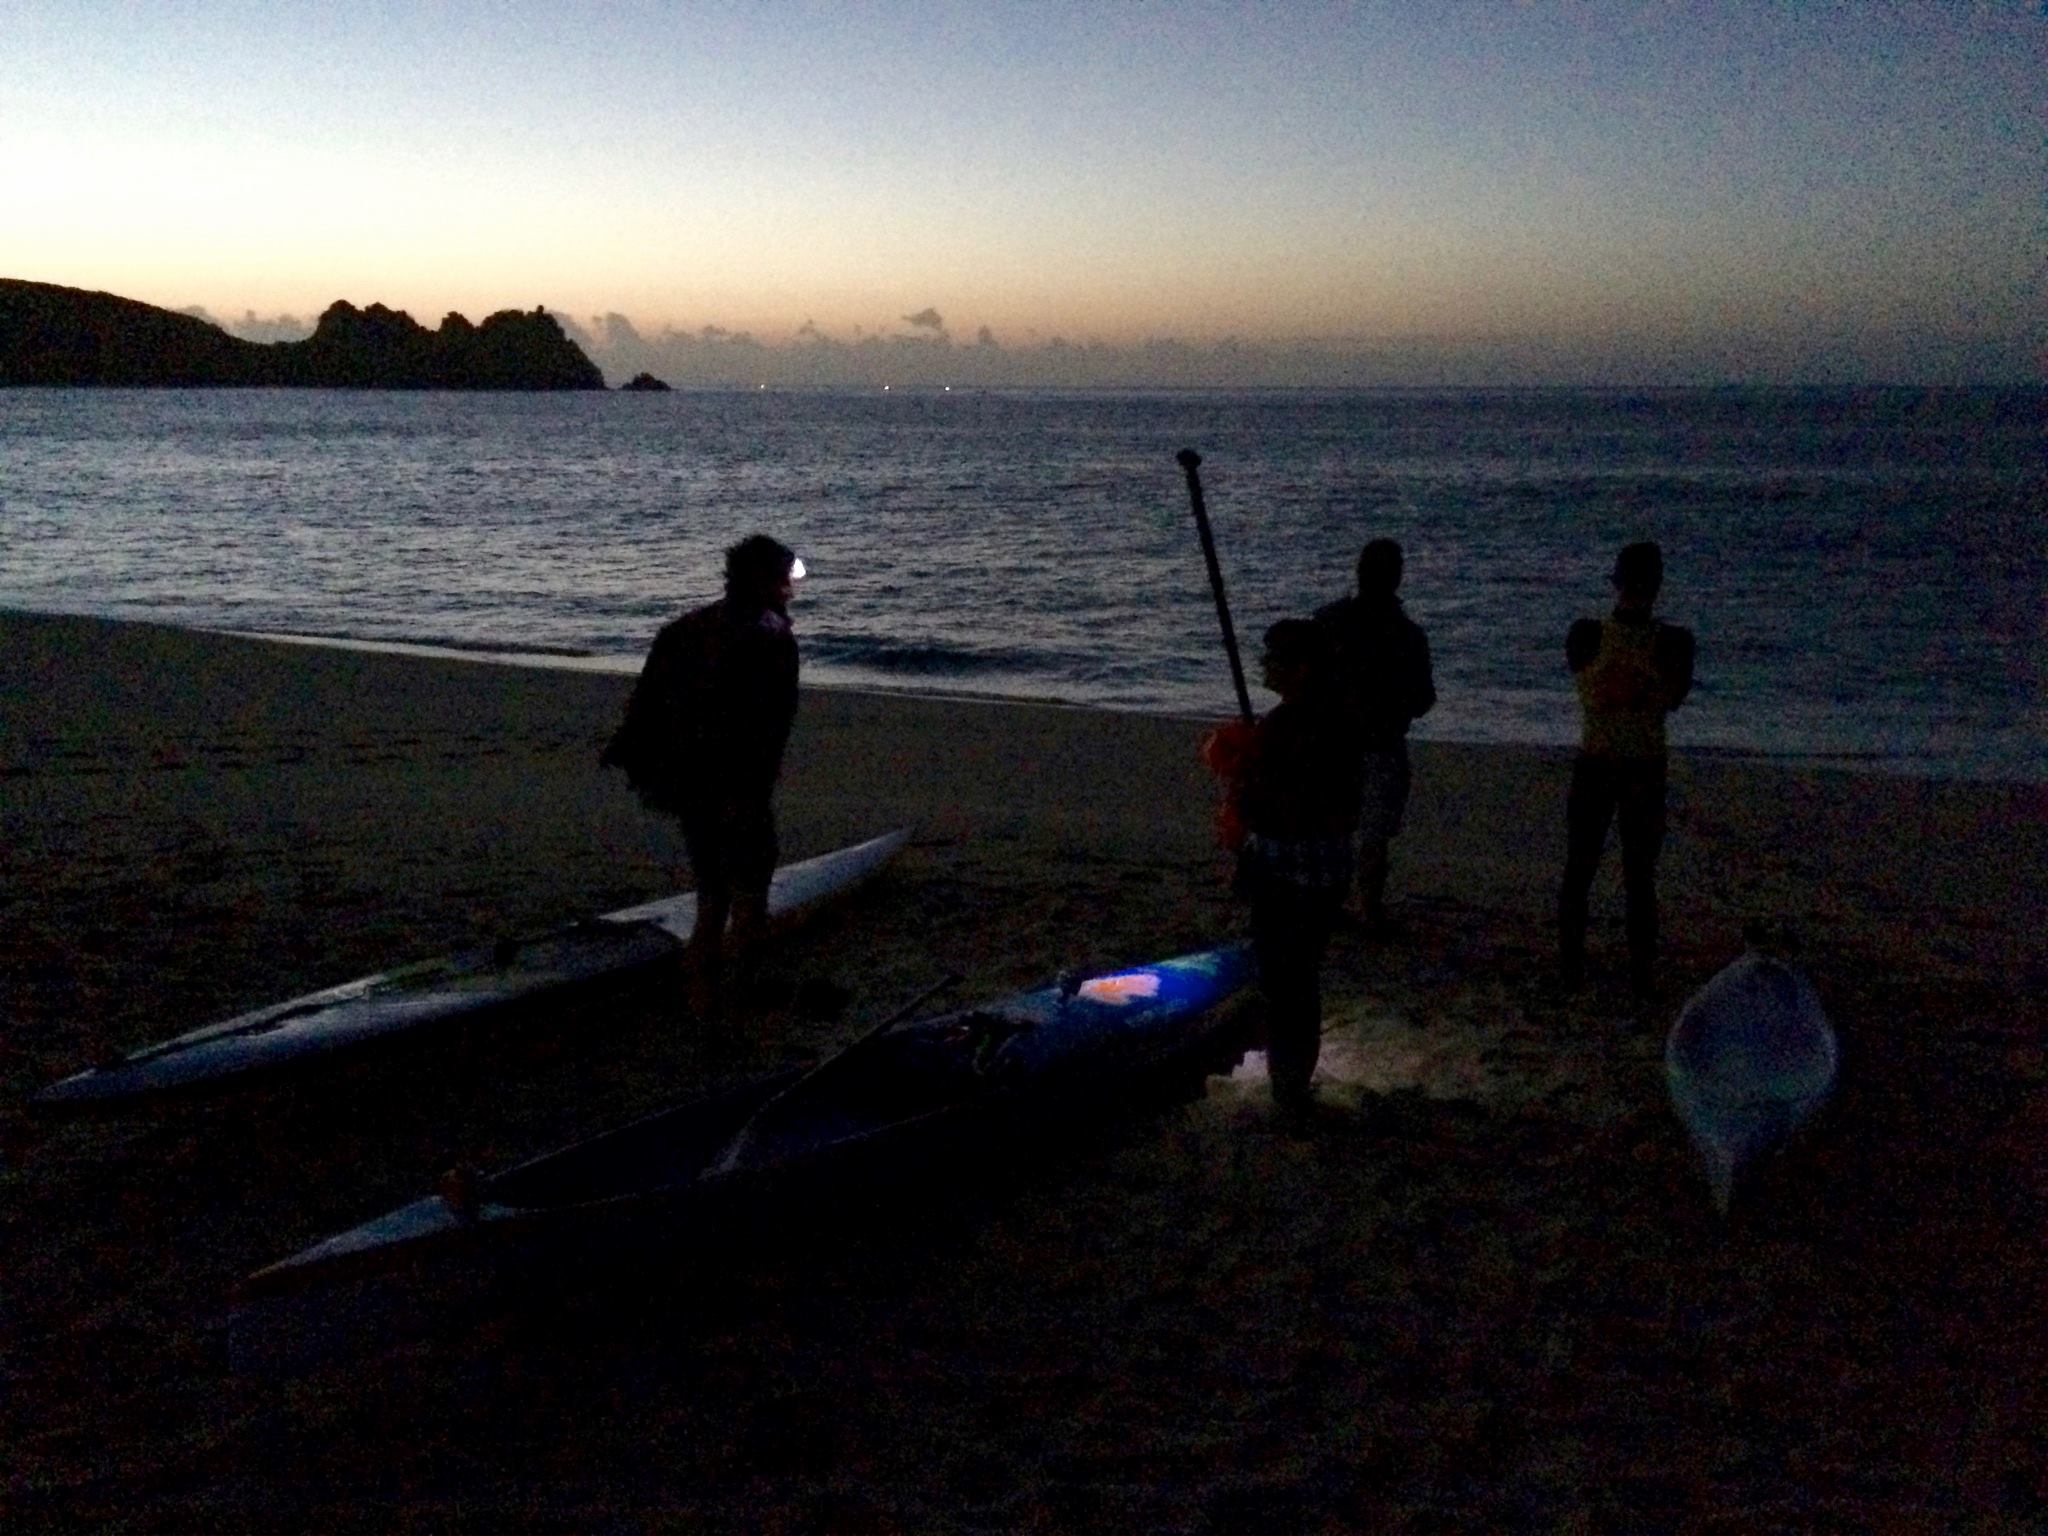 SUP boarders ready to go. Image Pierre Lopez